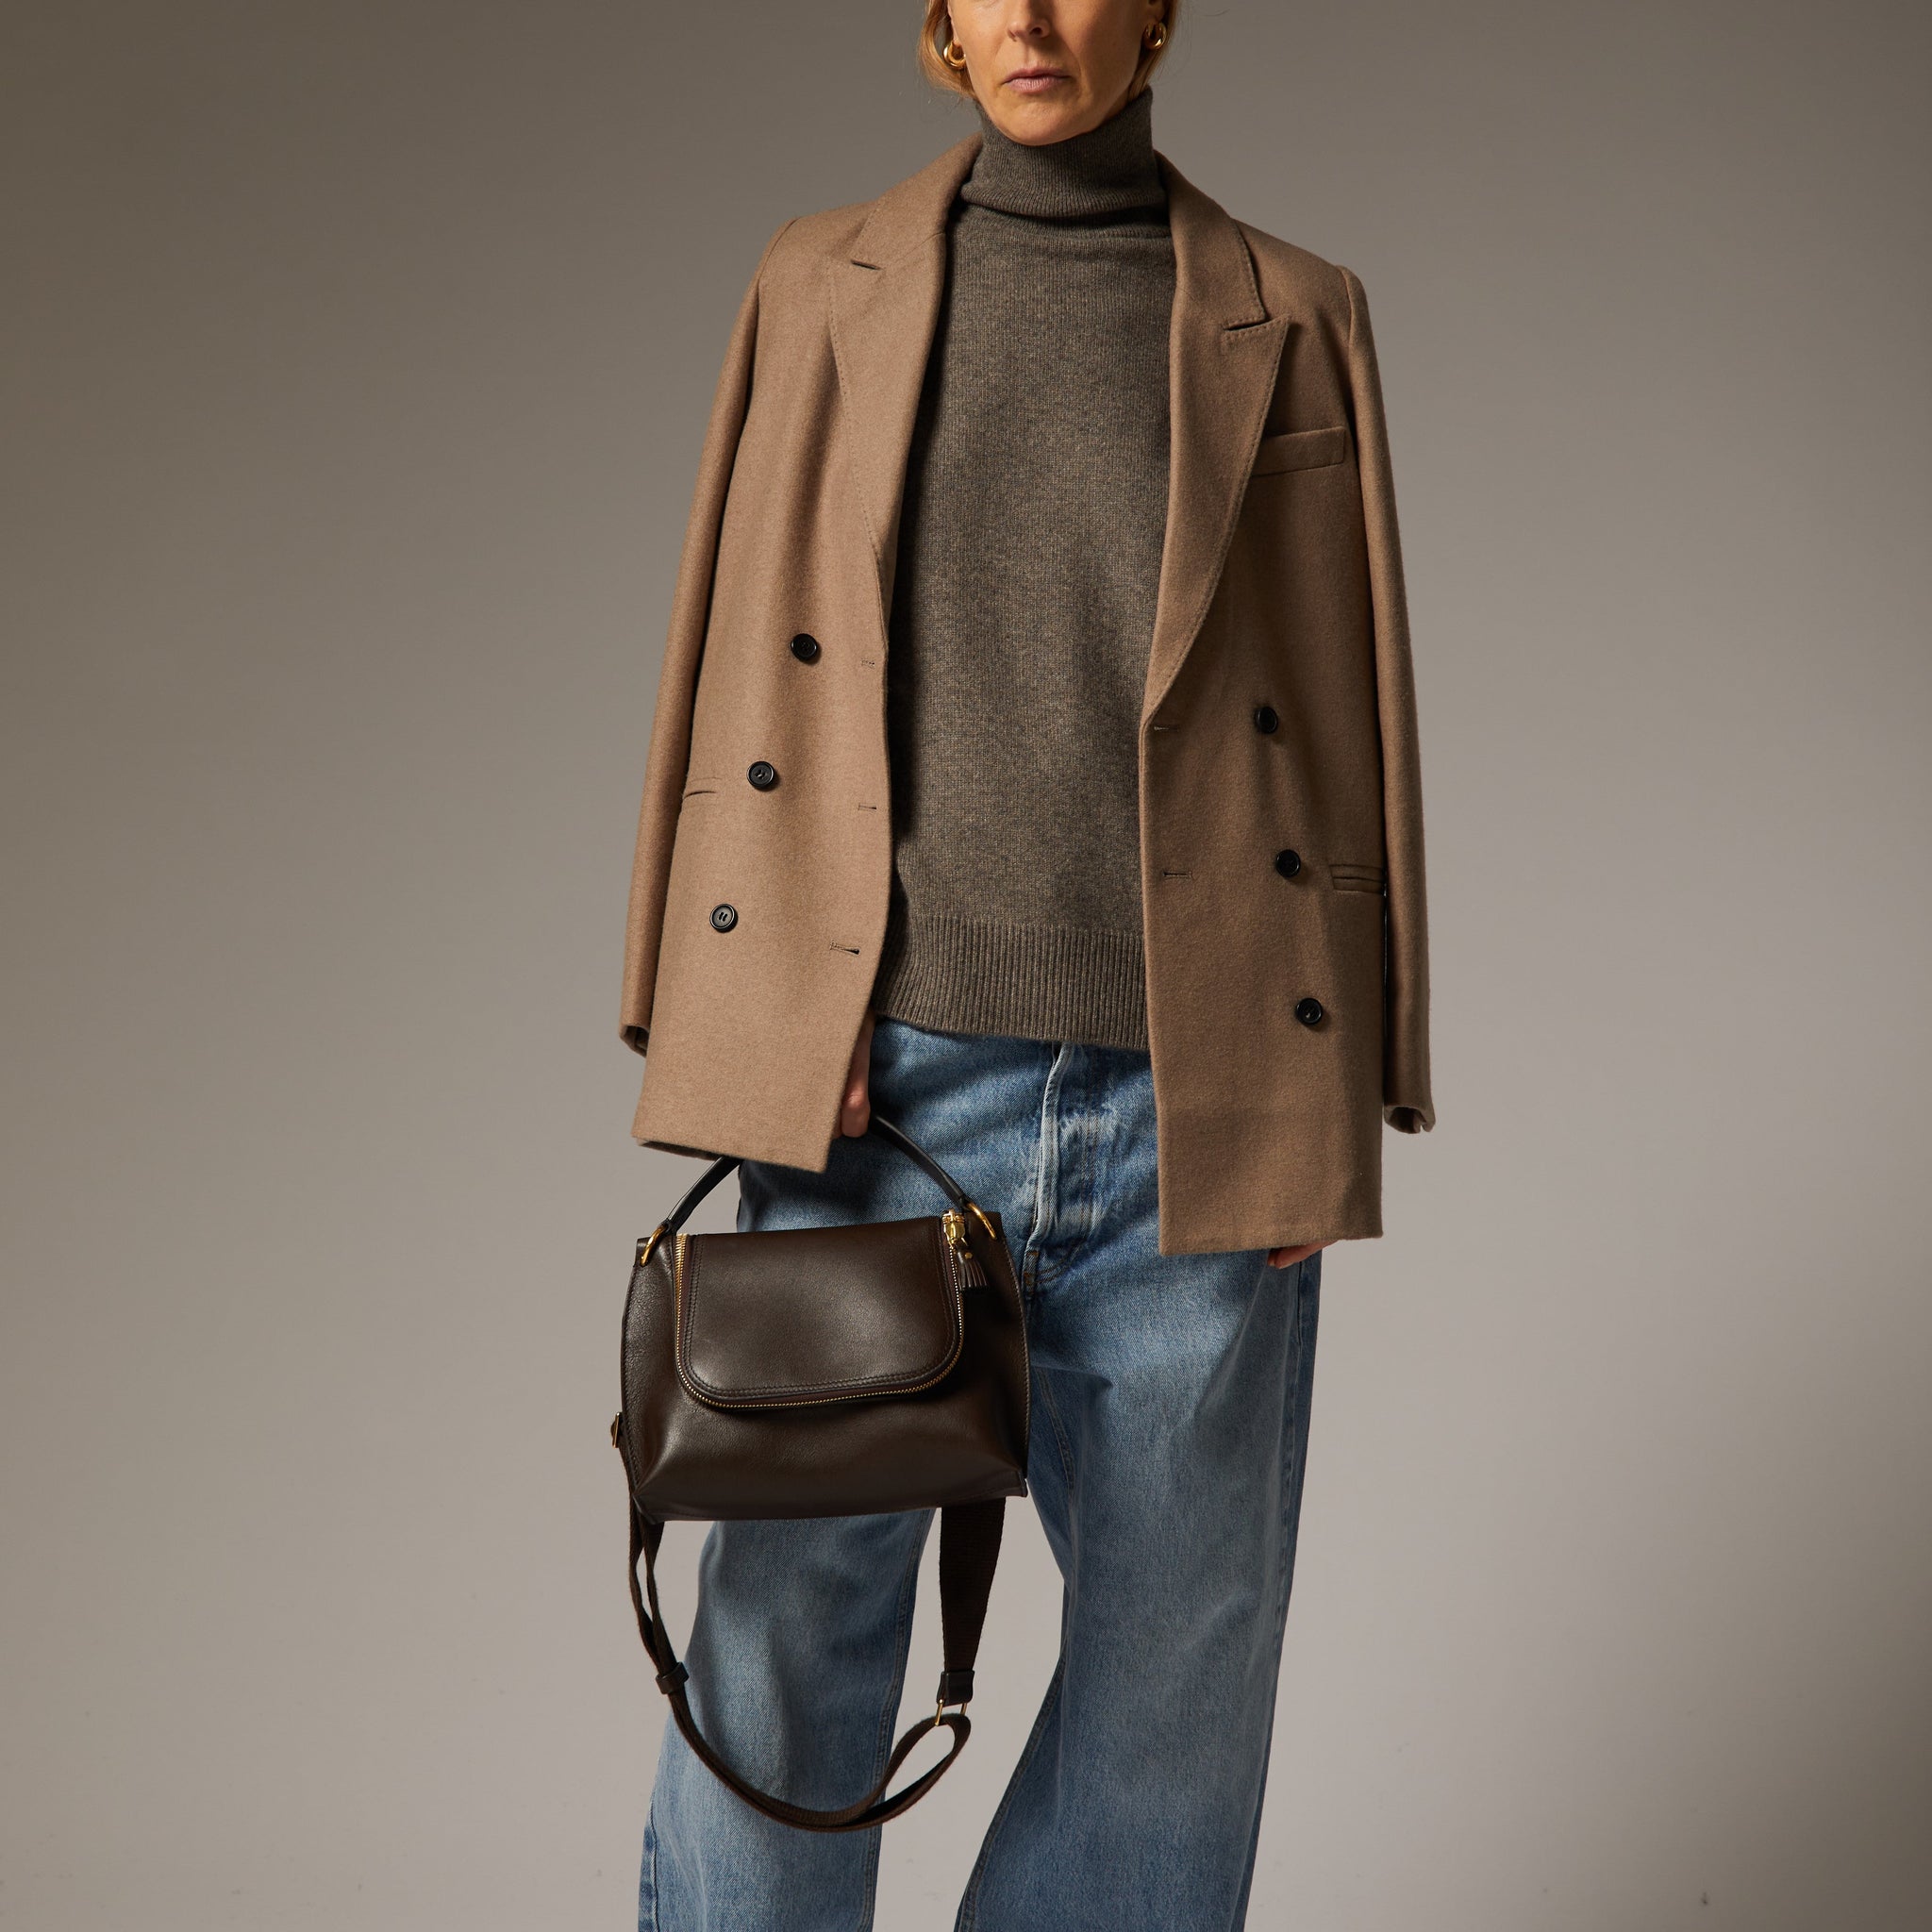 Vere Slouchy Cross-body -

                  
                    Flat Leather in Coffee -
                  

                  Anya Hindmarch US
